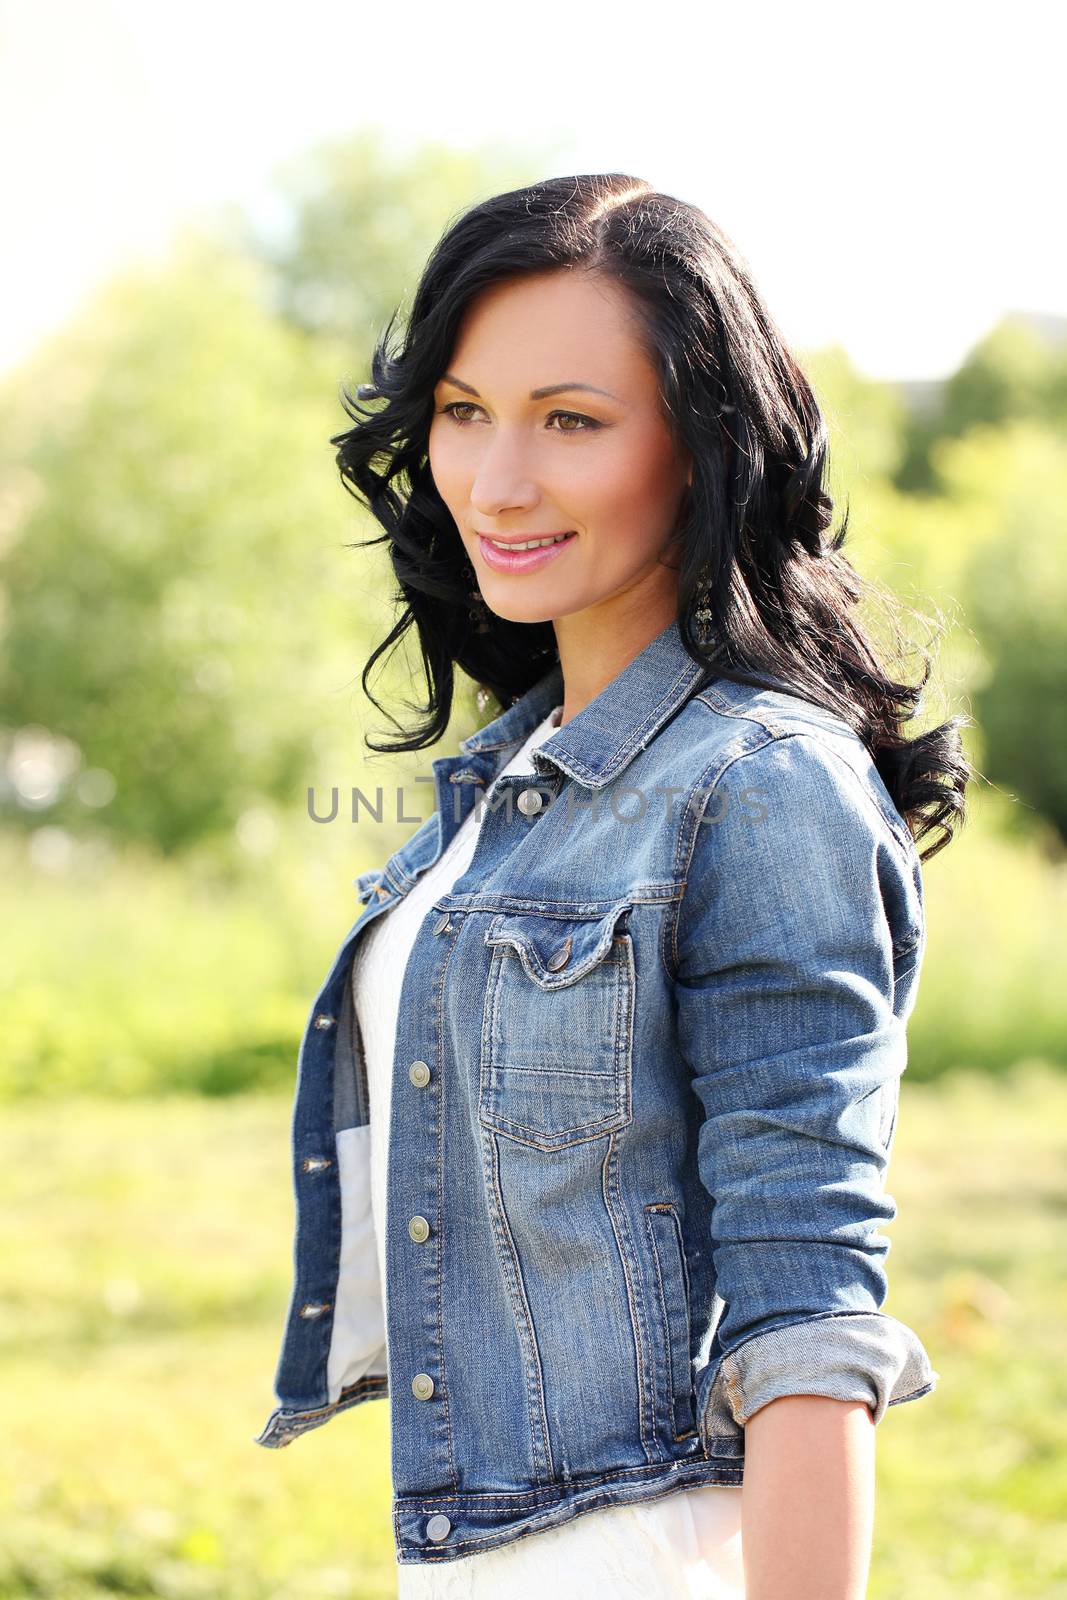 Beautiful young woman with jeans jacket in a park